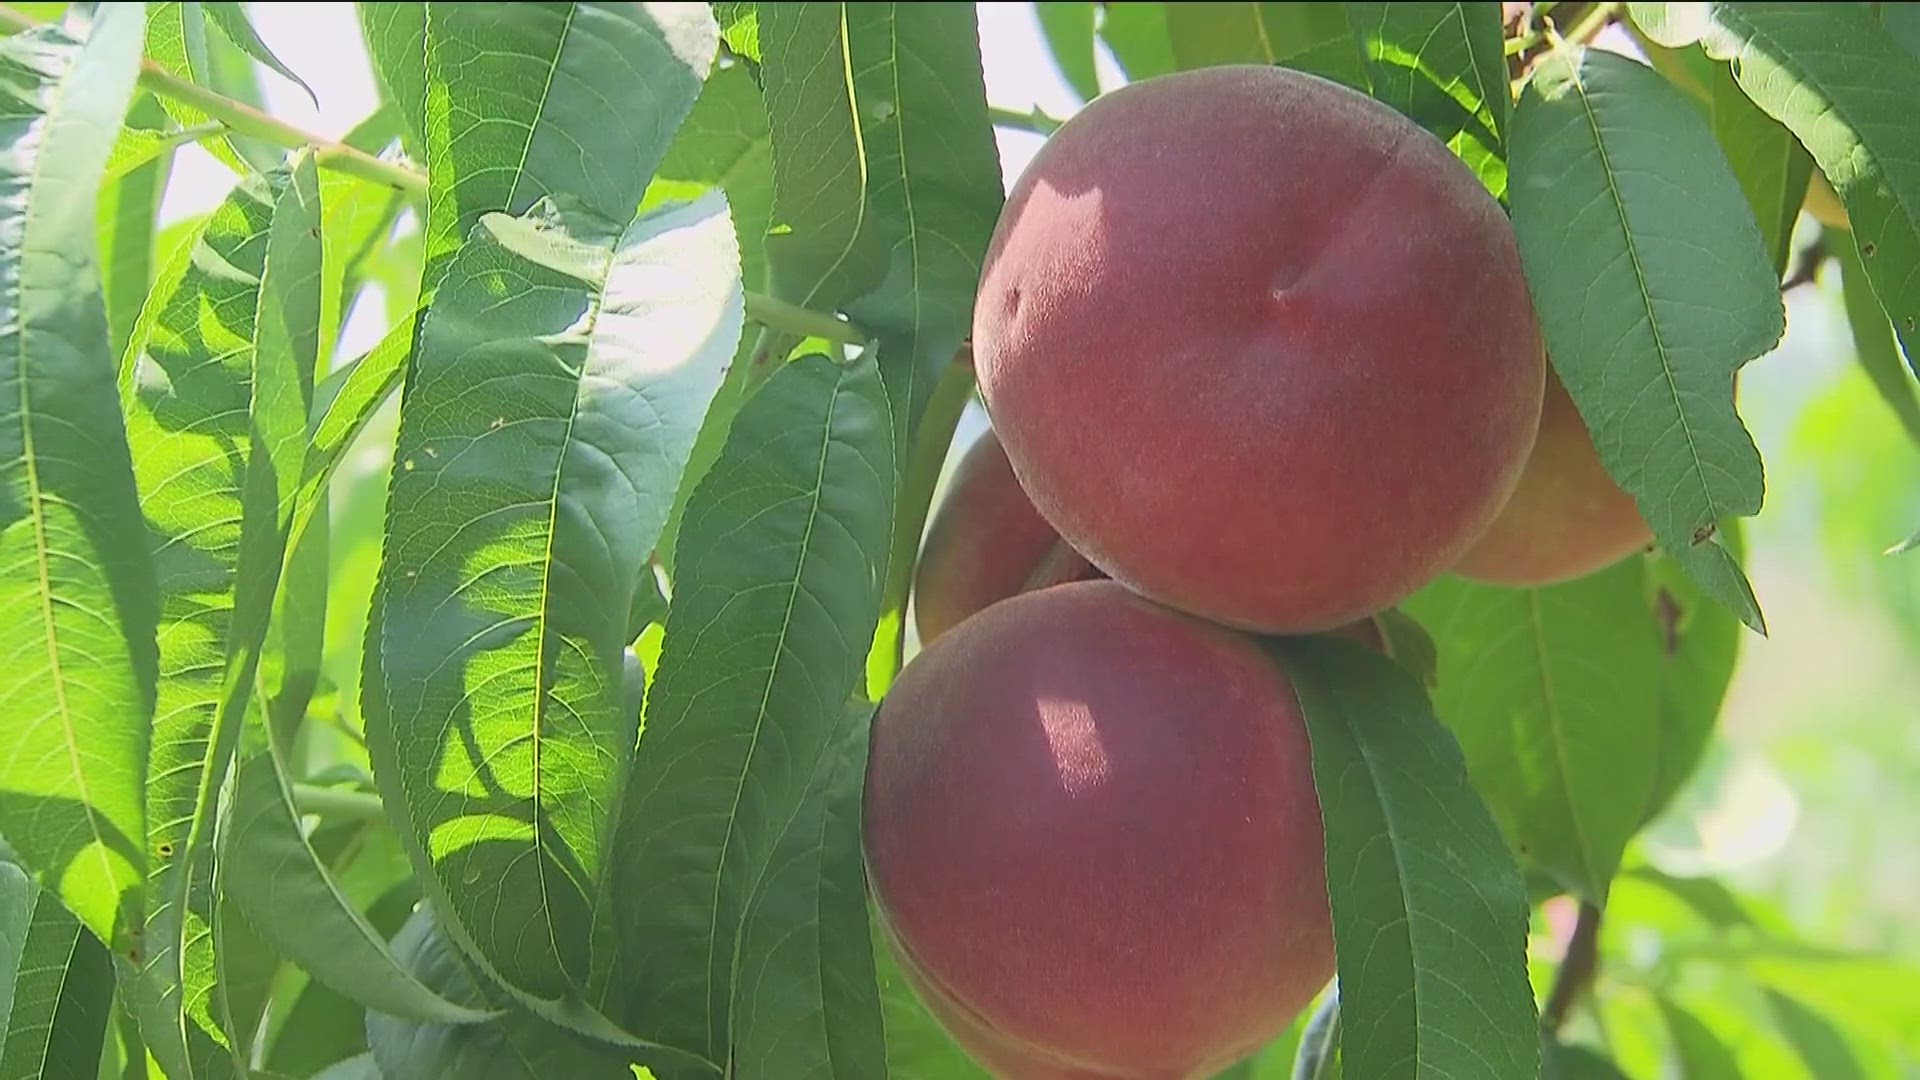 The state lost over 85% of its peaches this spring.